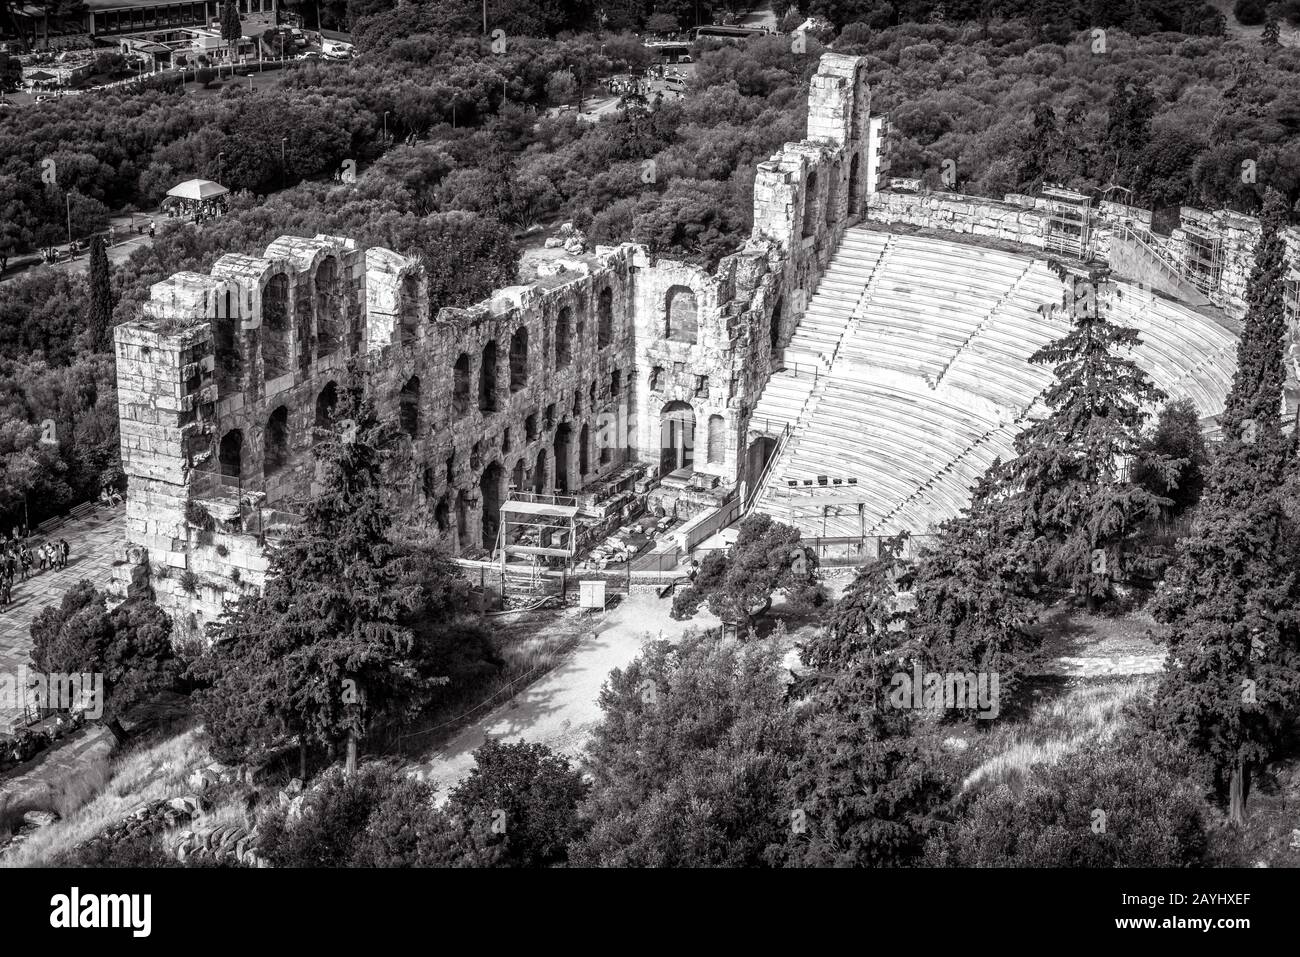 Odeon of Herodes Atticus at Acropolis in black and white, Athens, Greece. It is a famous landmark of Athens. Landscape with antique amphitheater. Pano Stock Photo